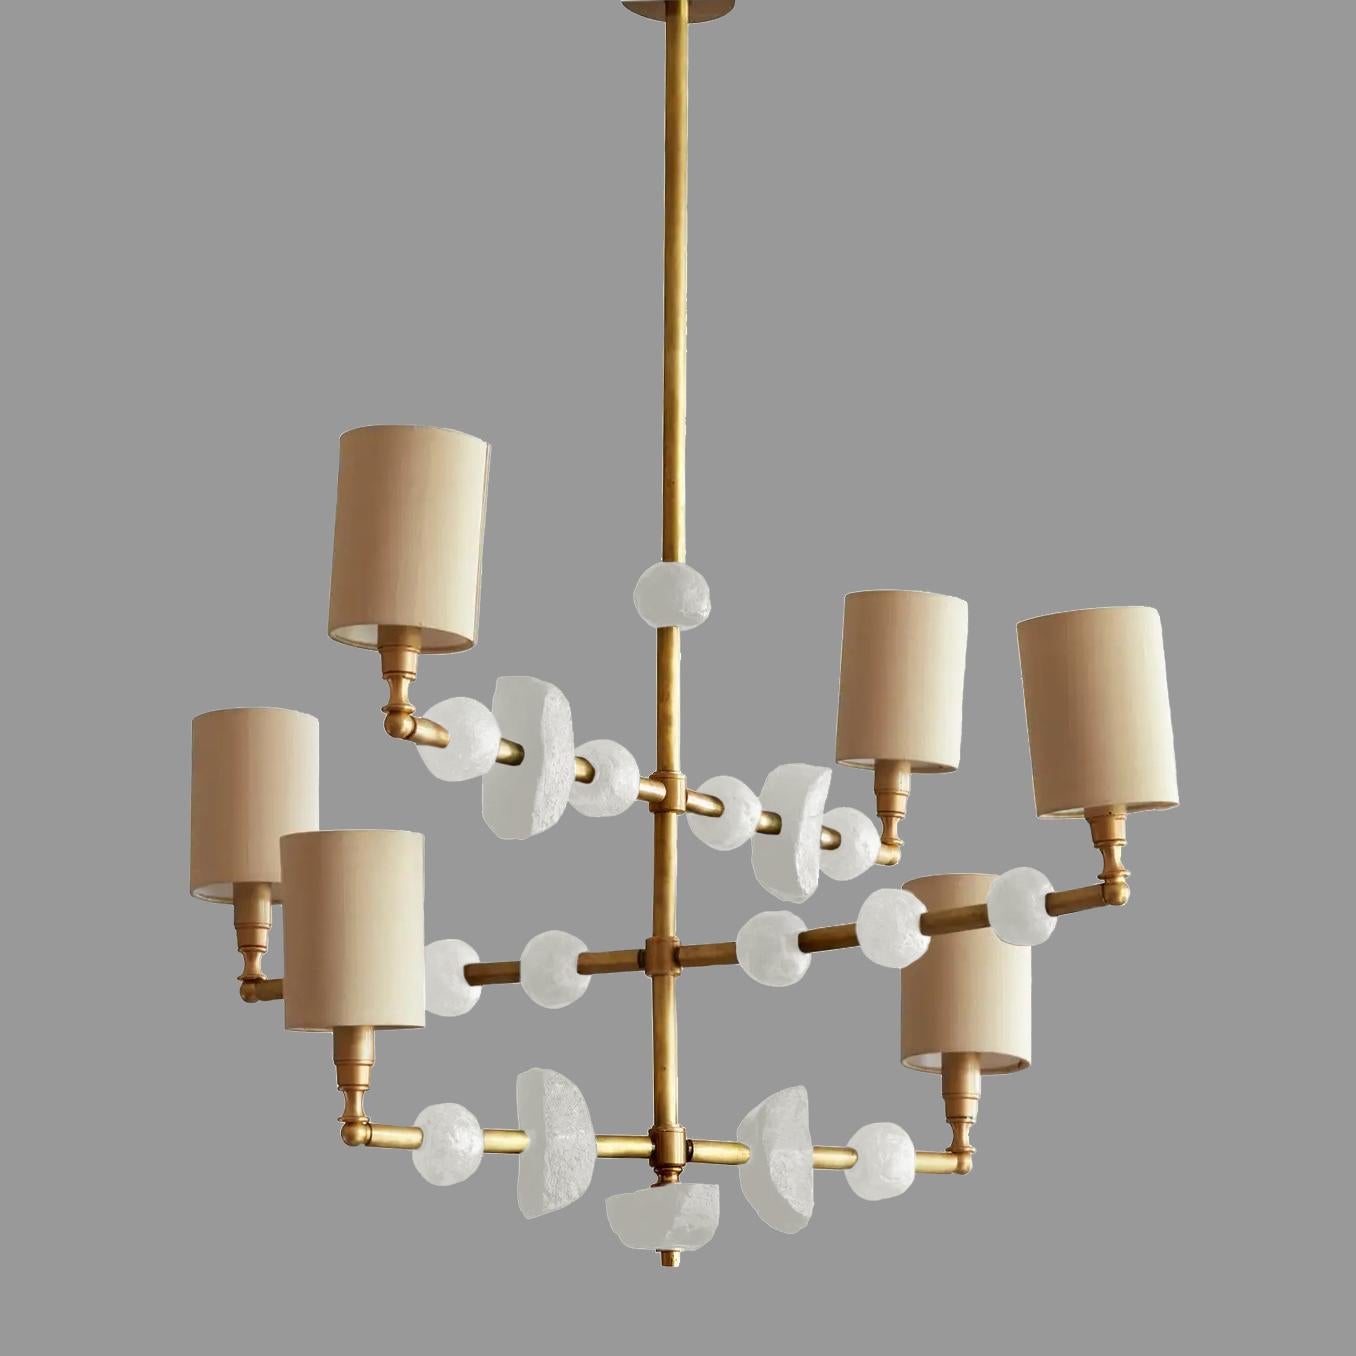 This contemporary three-tier chandelier by Margit Wittig features sculptural components with organic and subtle textures, all cast and treated with multiple layers of patina and in her London studio. The contrast of white waxed bio-resin and